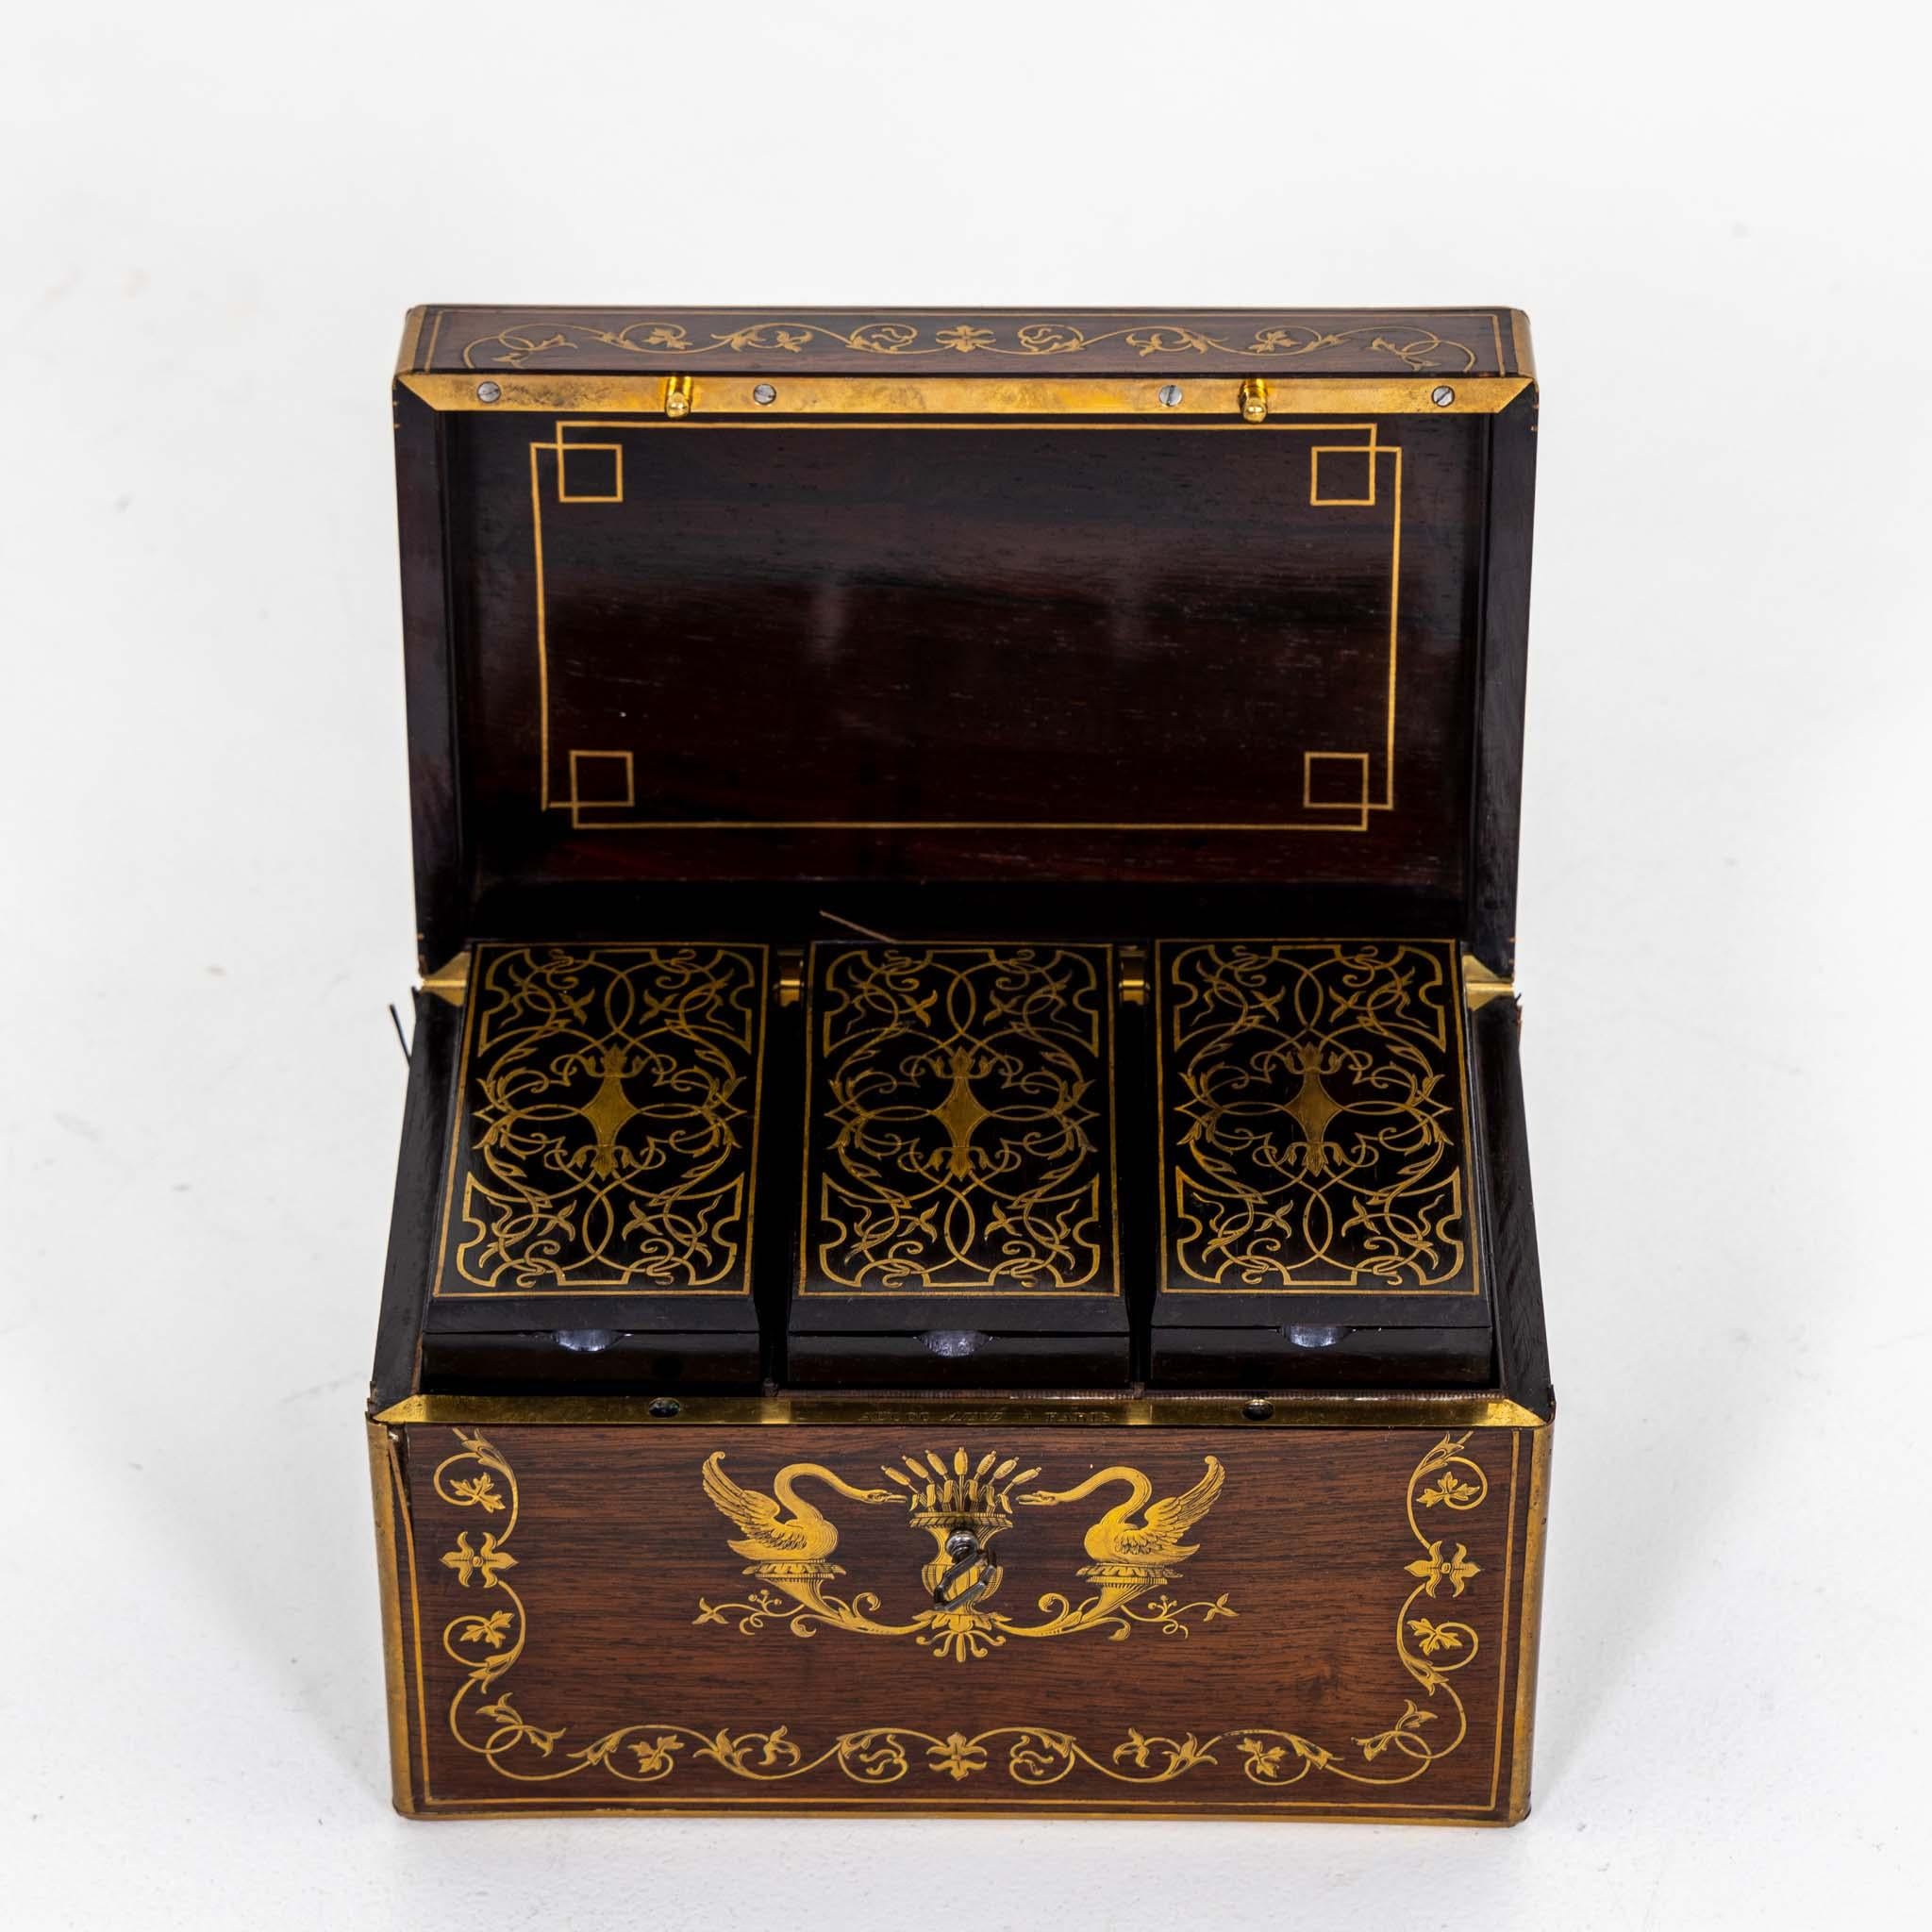 Small tea chest by Aucoc Paris made of mahogany with brass inlays in the form of swans and tendril motifs. The lockable box is equipped with three vessels inside, which also show brass inlays on the lids. Stamped 